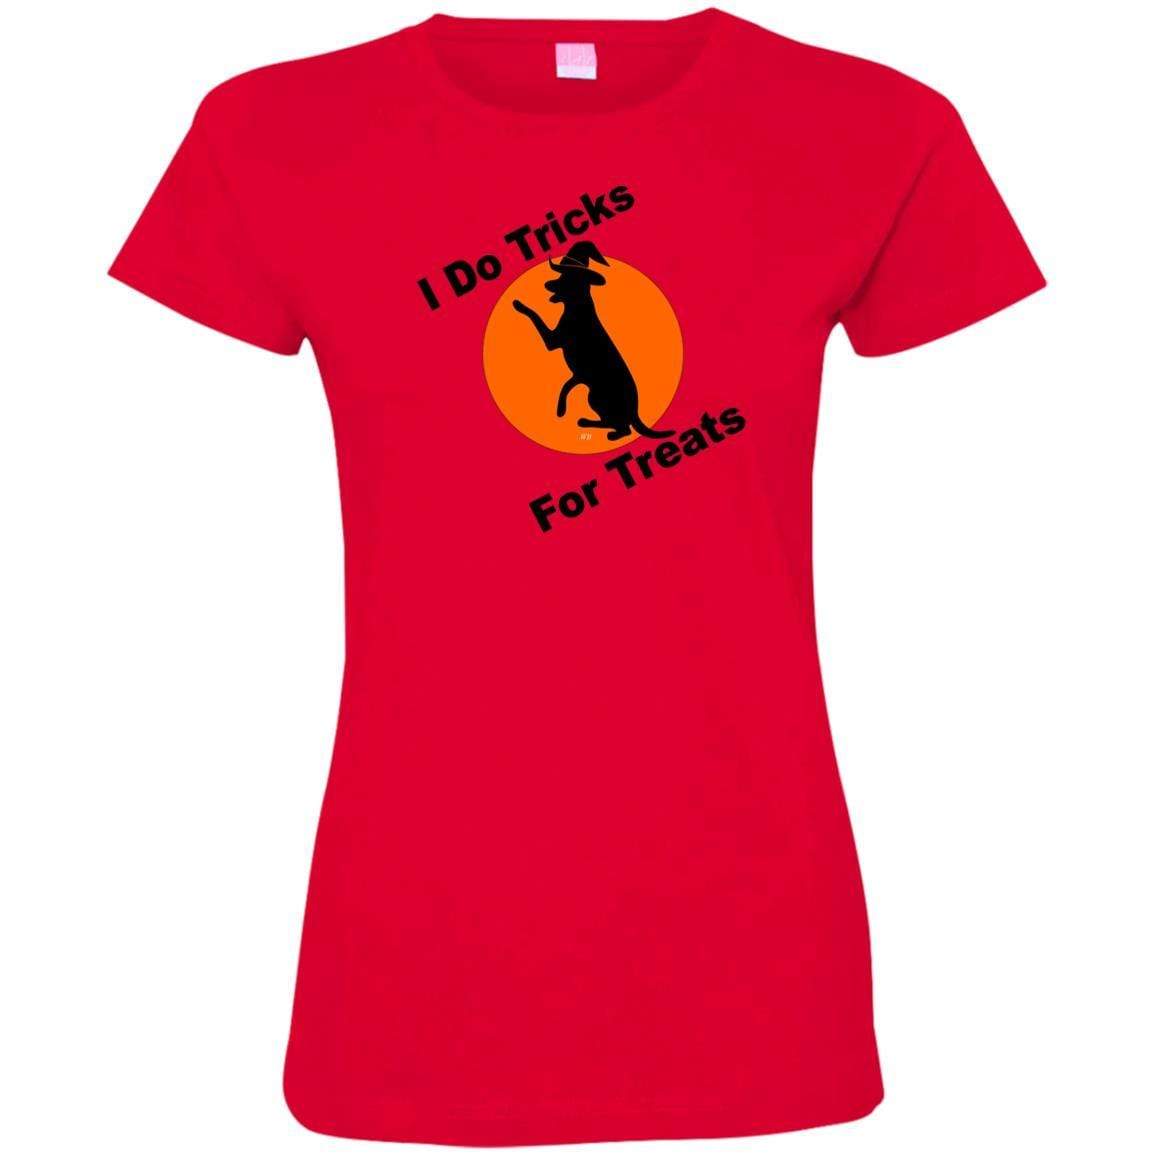 T-Shirts Red / S WineyBitches.Co "I Do Tricks For Treats" Dog- Ladies' Fine Jersey T-Shirt WineyBitchesCo